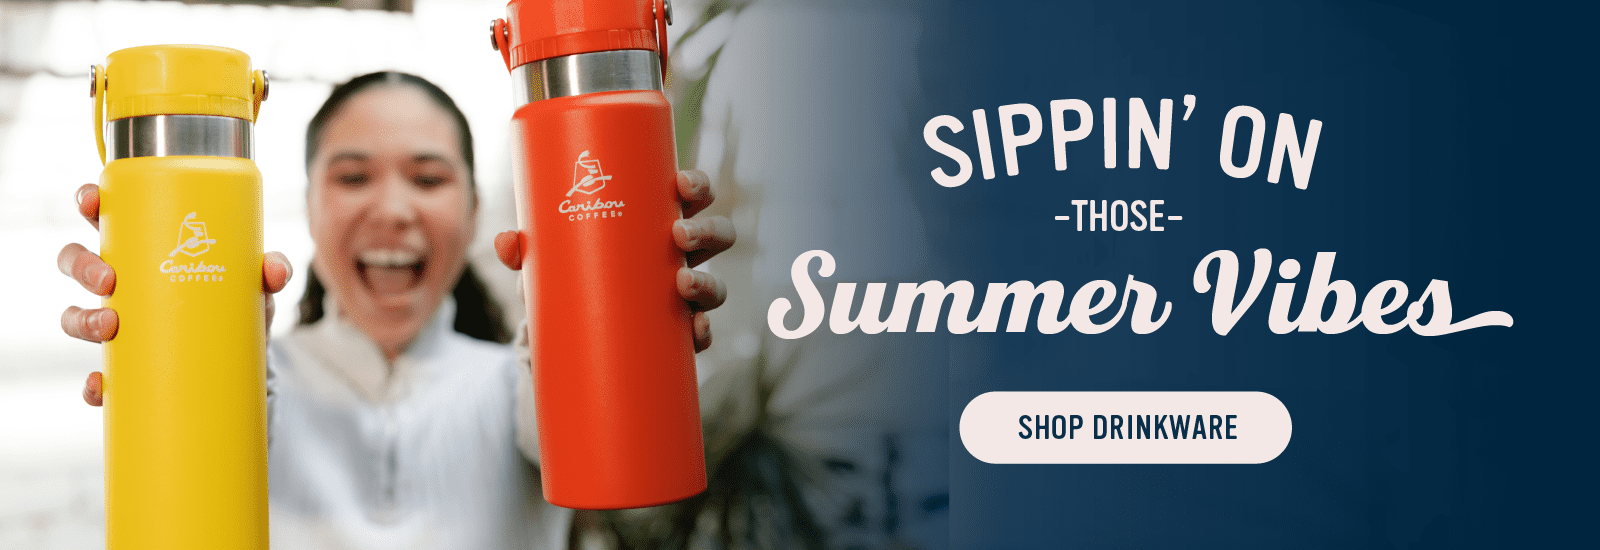 Sipping on the summer vibes. Shop Now.